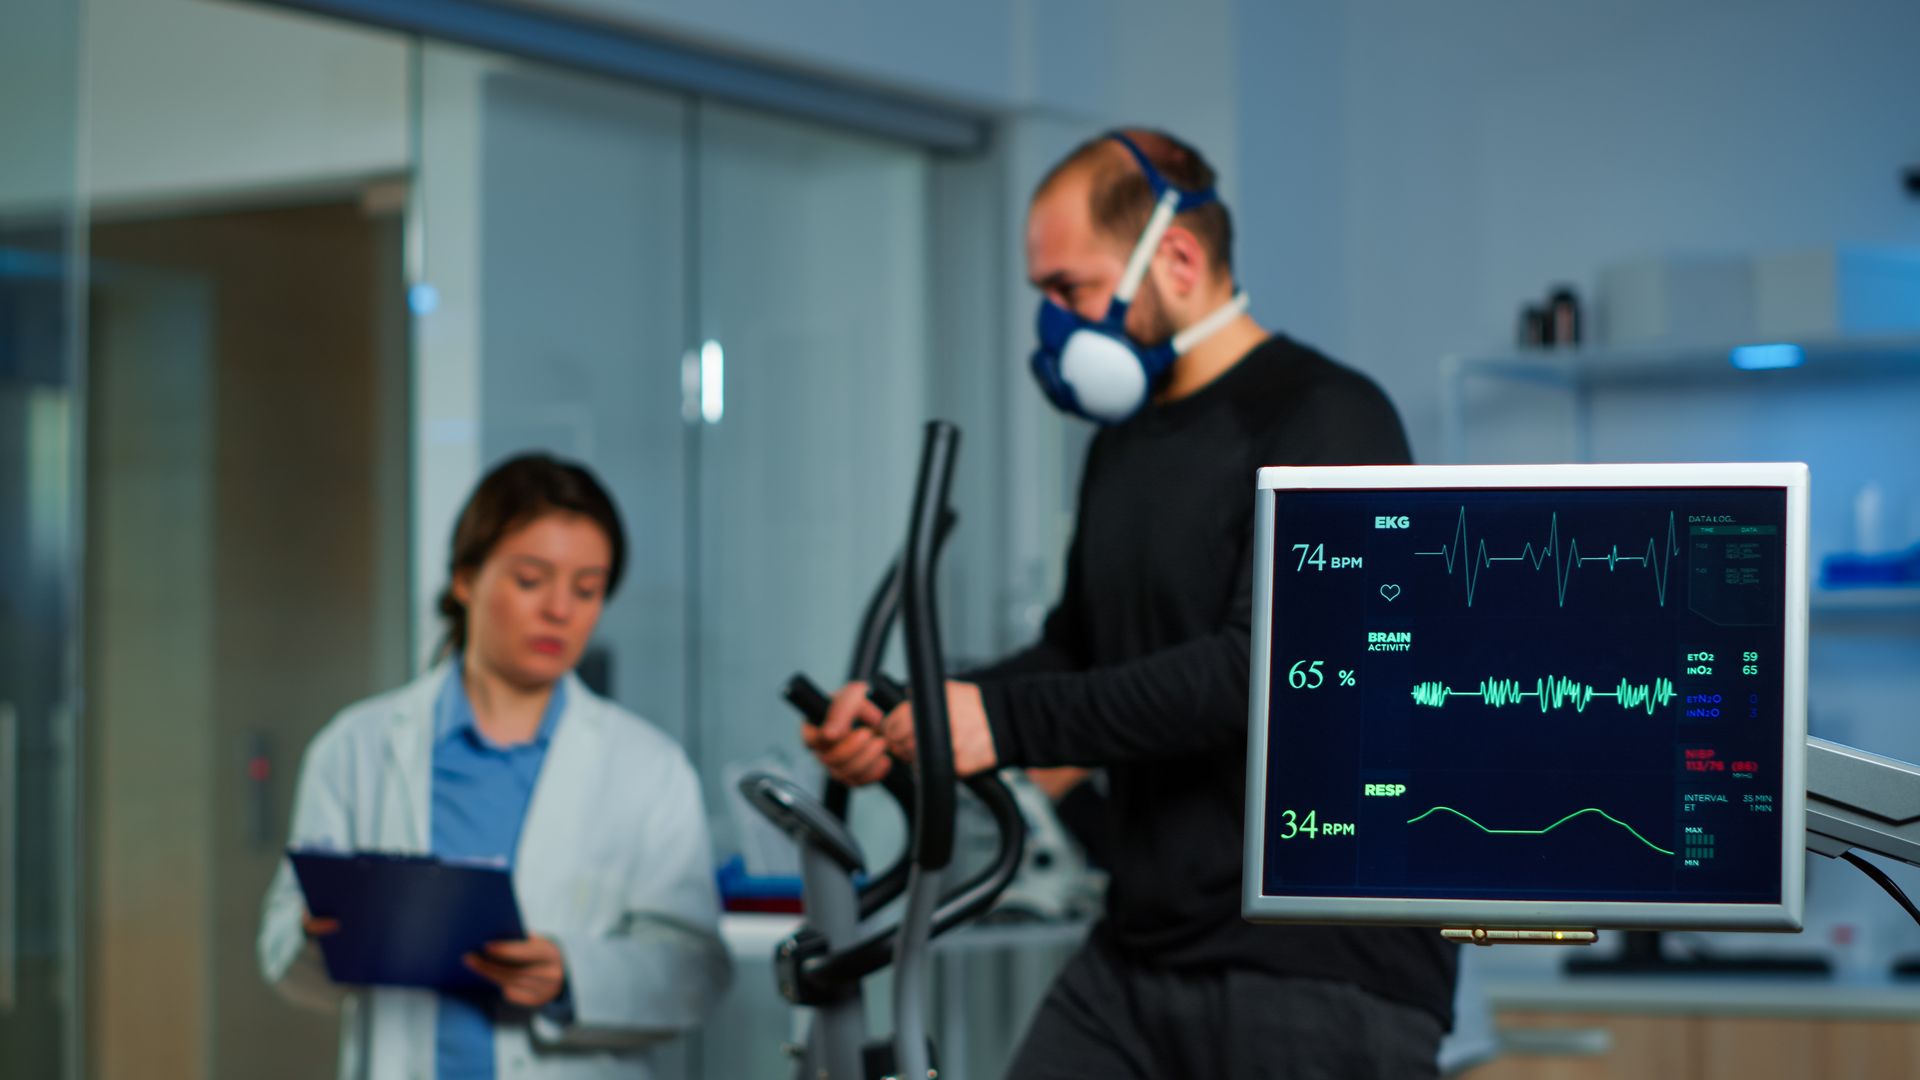 a man is wearing a mask while riding an exercise bike in a lab .